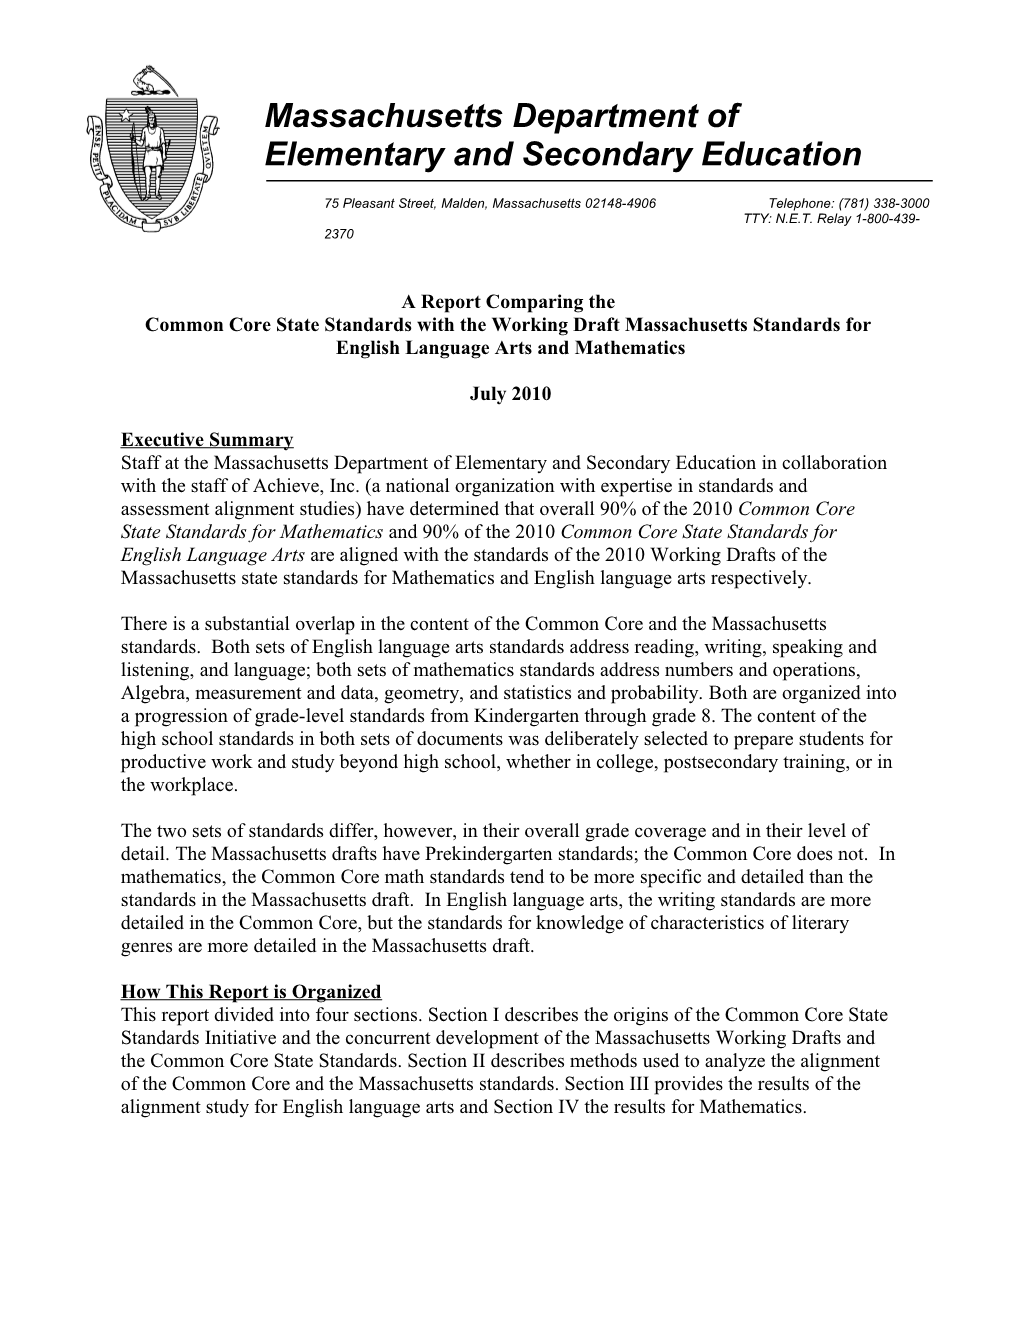 Side-Byside Analyses of the Common Core and MA Working Drafts July 2010